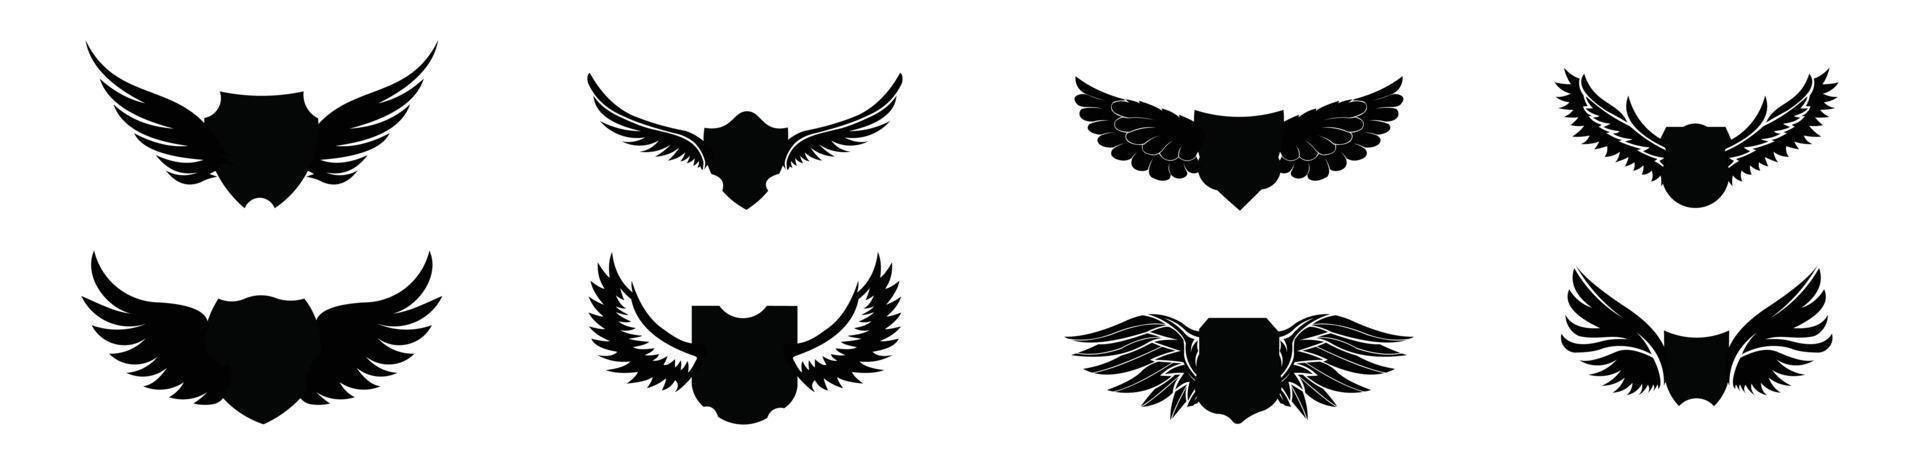 Set of blank  shields with wings,   Set of heraldic winged shields in different shapes with bird vector